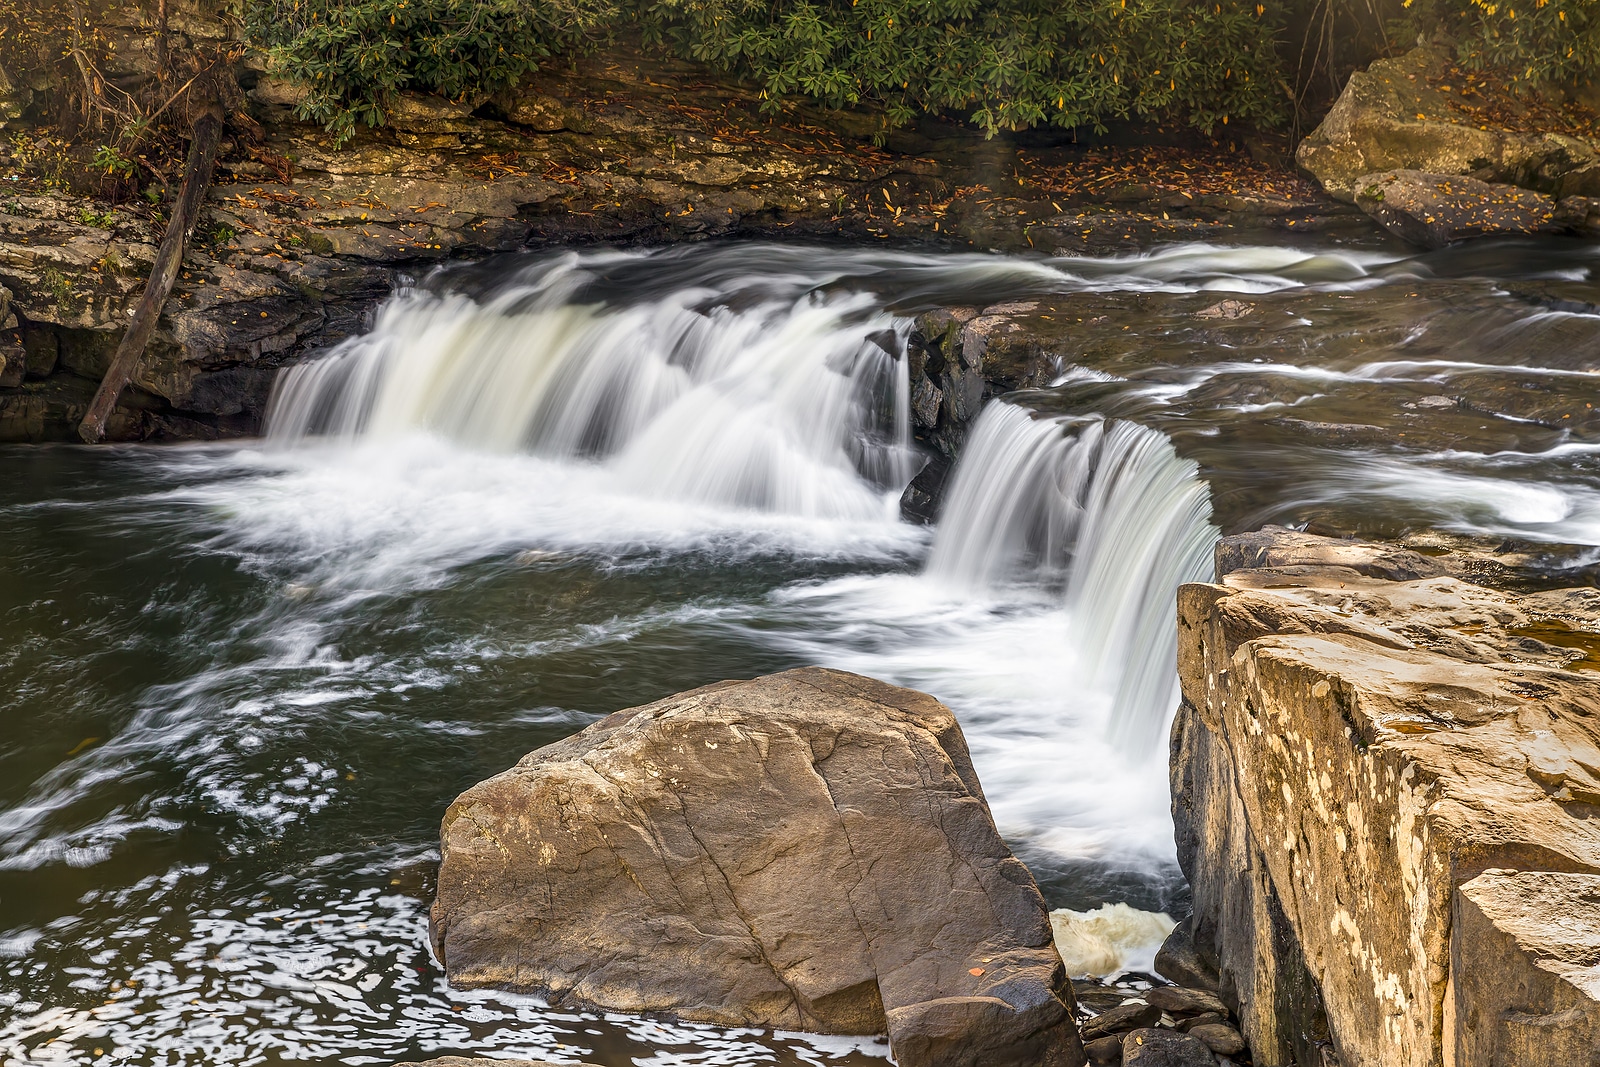 Visit Swallow Falls State Park Near our Deep Creek Lake Hotel This Fall